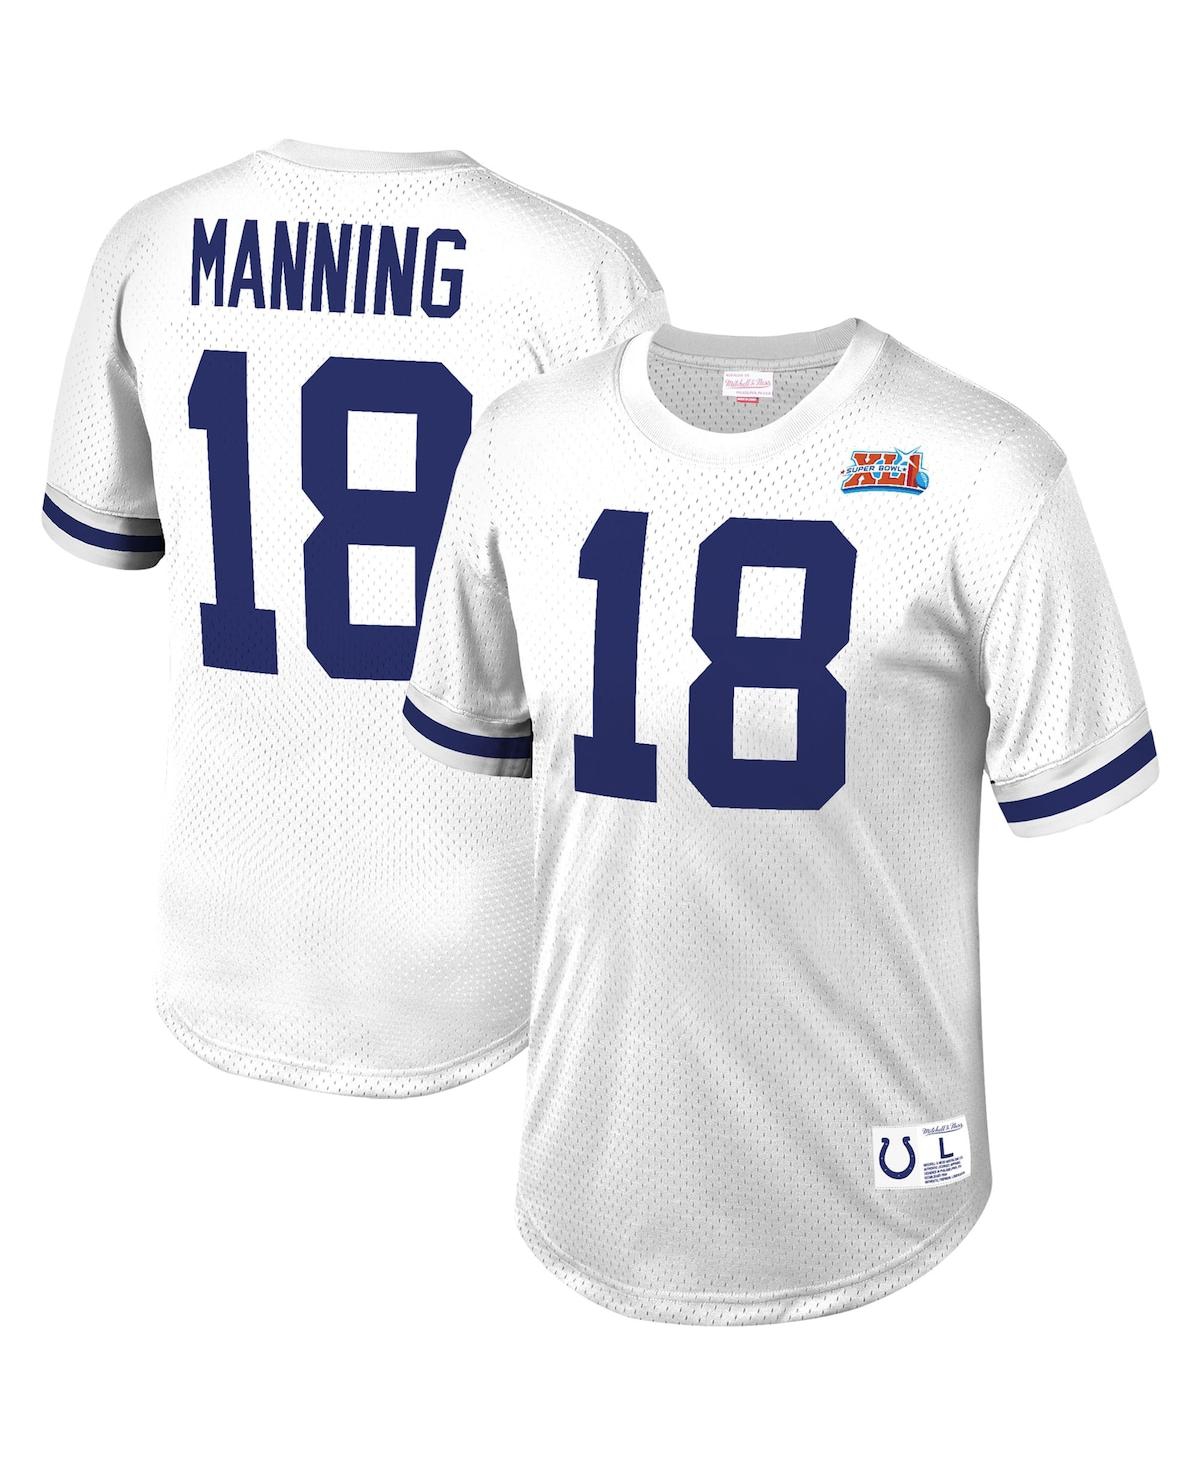 Men's Mitchell & Ness Peyton Manning White Indianapolis Colts Retired Player Name and Number Mesh Top - White